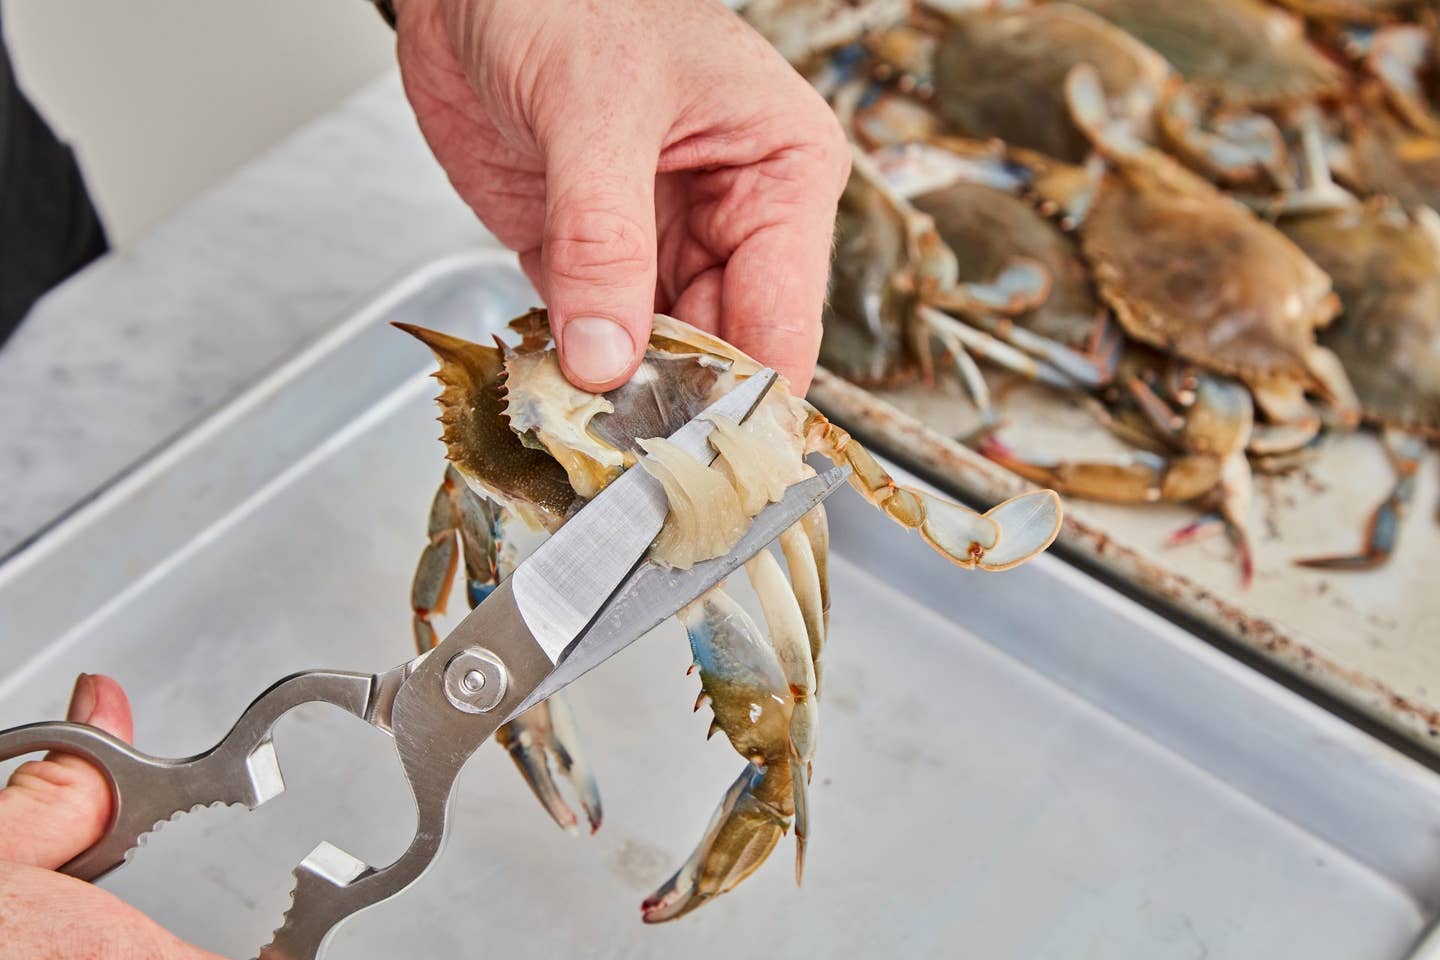 How to Clean Soft Shell Crab